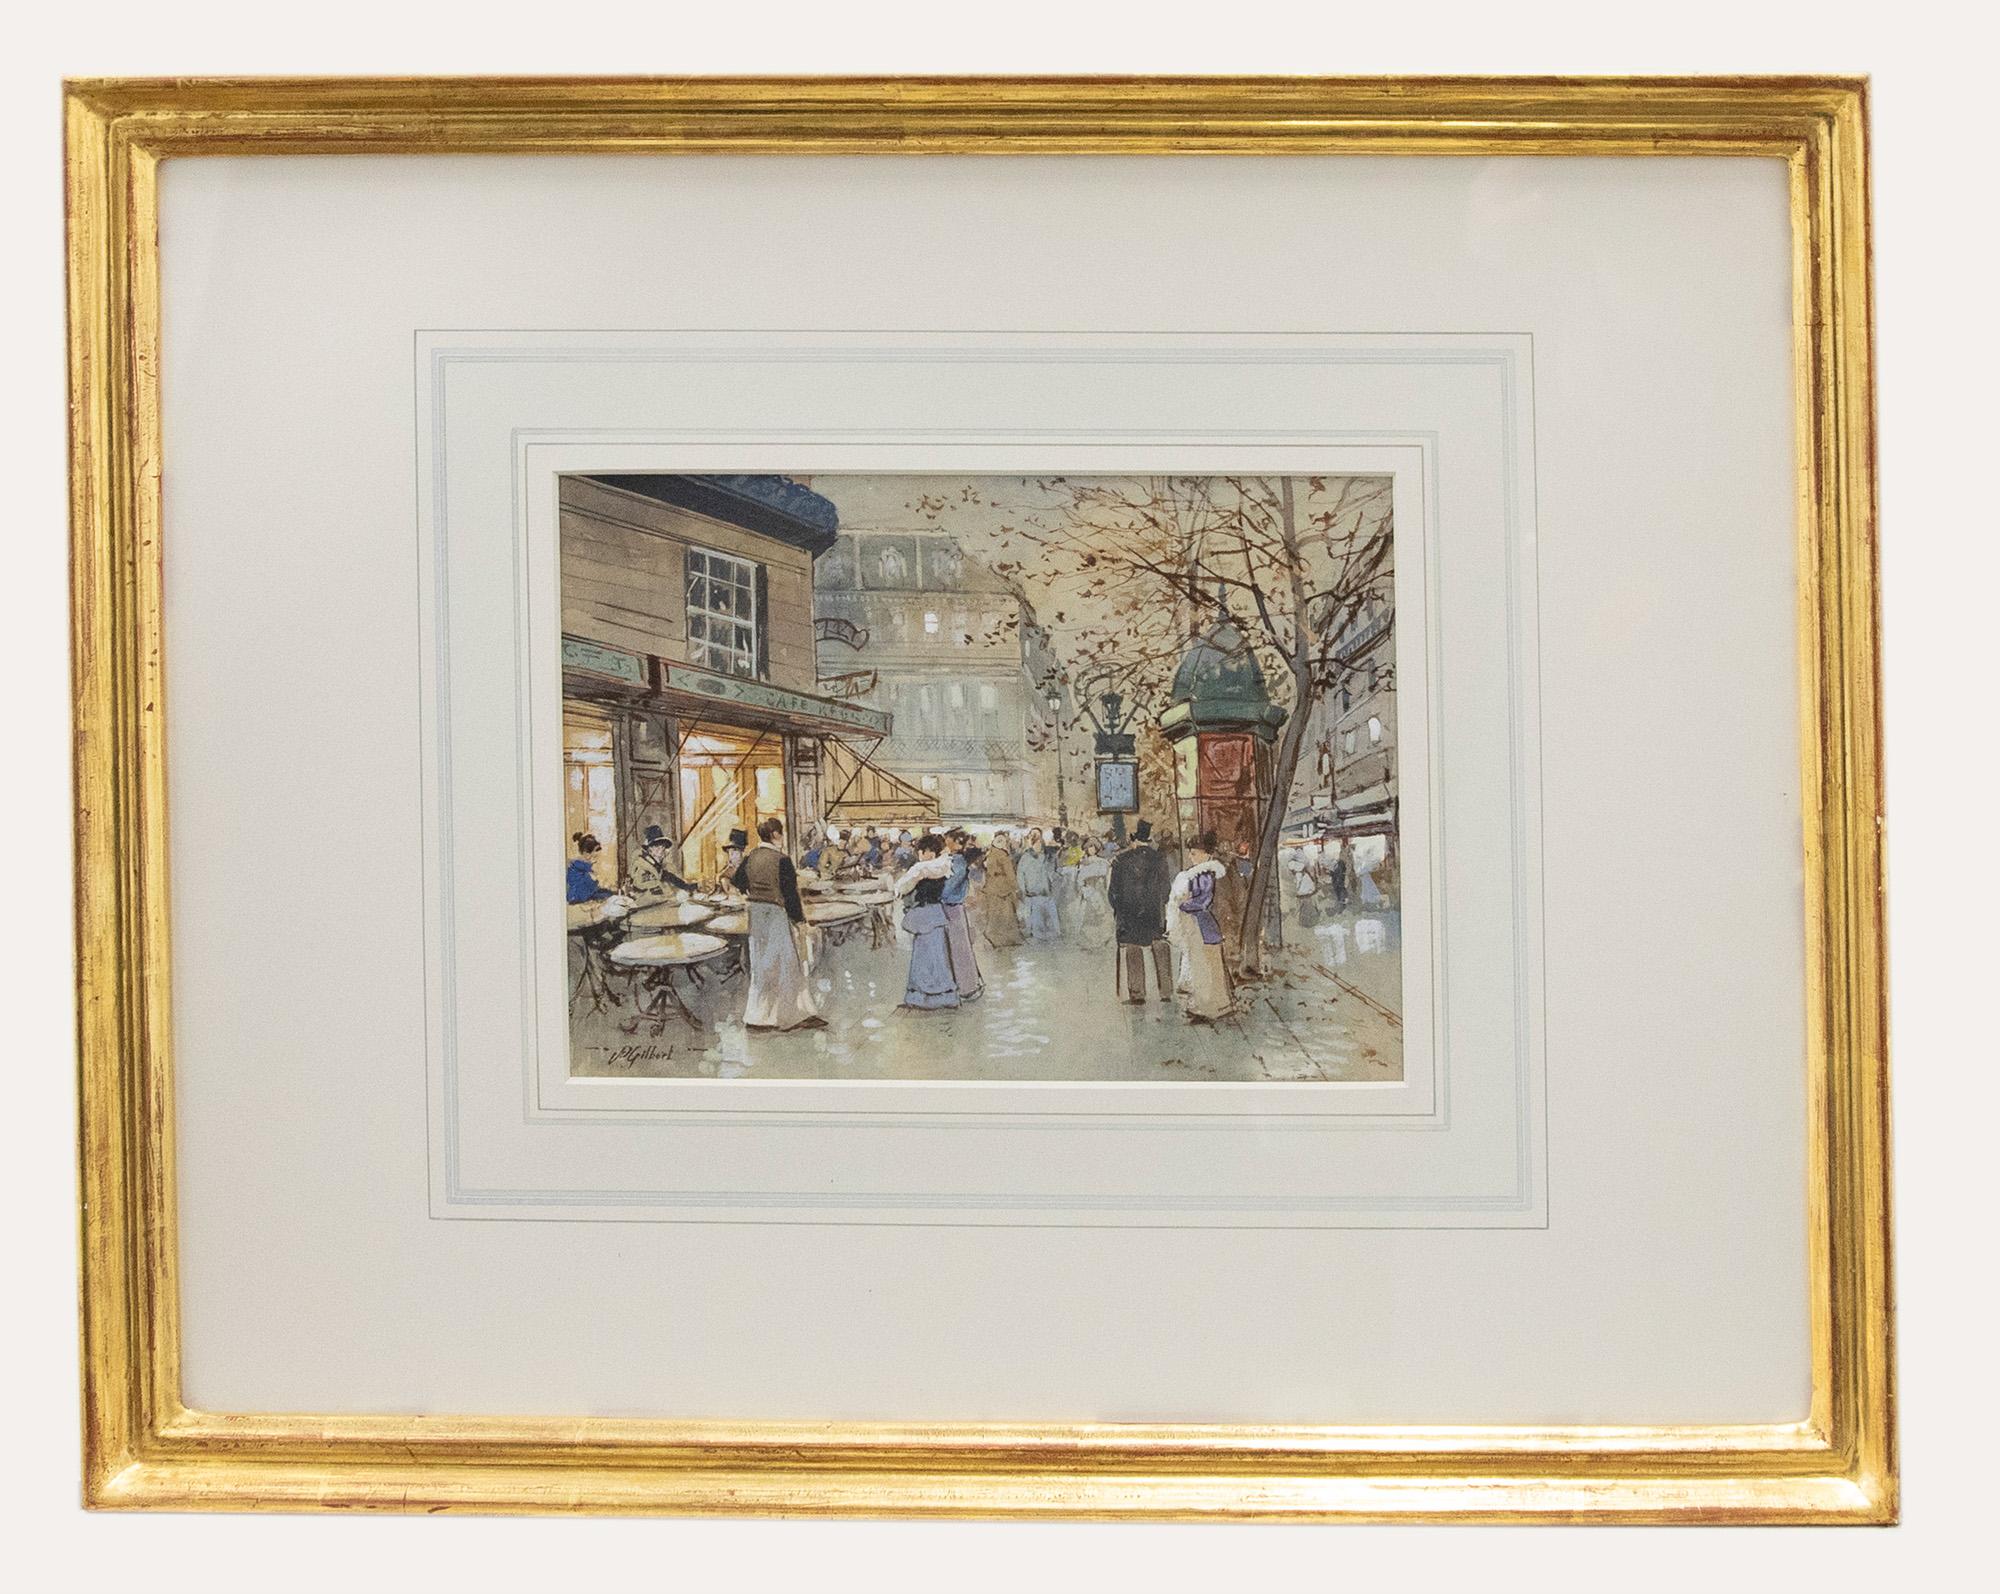 A delightful watercolour study of a Parisian boulevard filled with people in the glow of cafe and restaurant lights. Signed to the lower right. Presented in a gilt frame and washline mount! On paper.